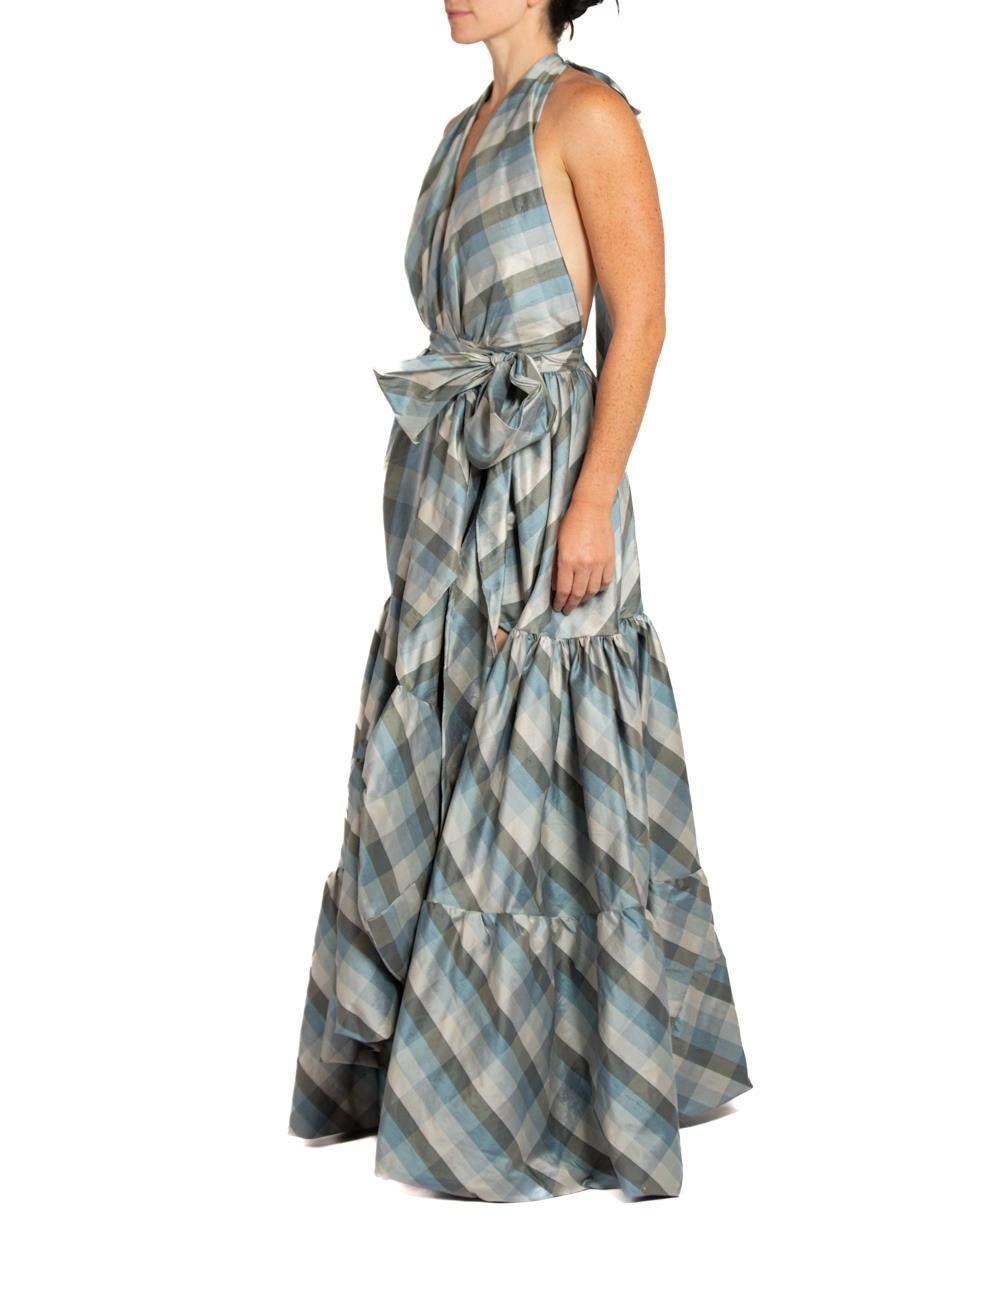 MORPHEW COLLECTION Blue & Gray Silk Taffeta Plaid Gown In Excellent Condition For Sale In New York, NY